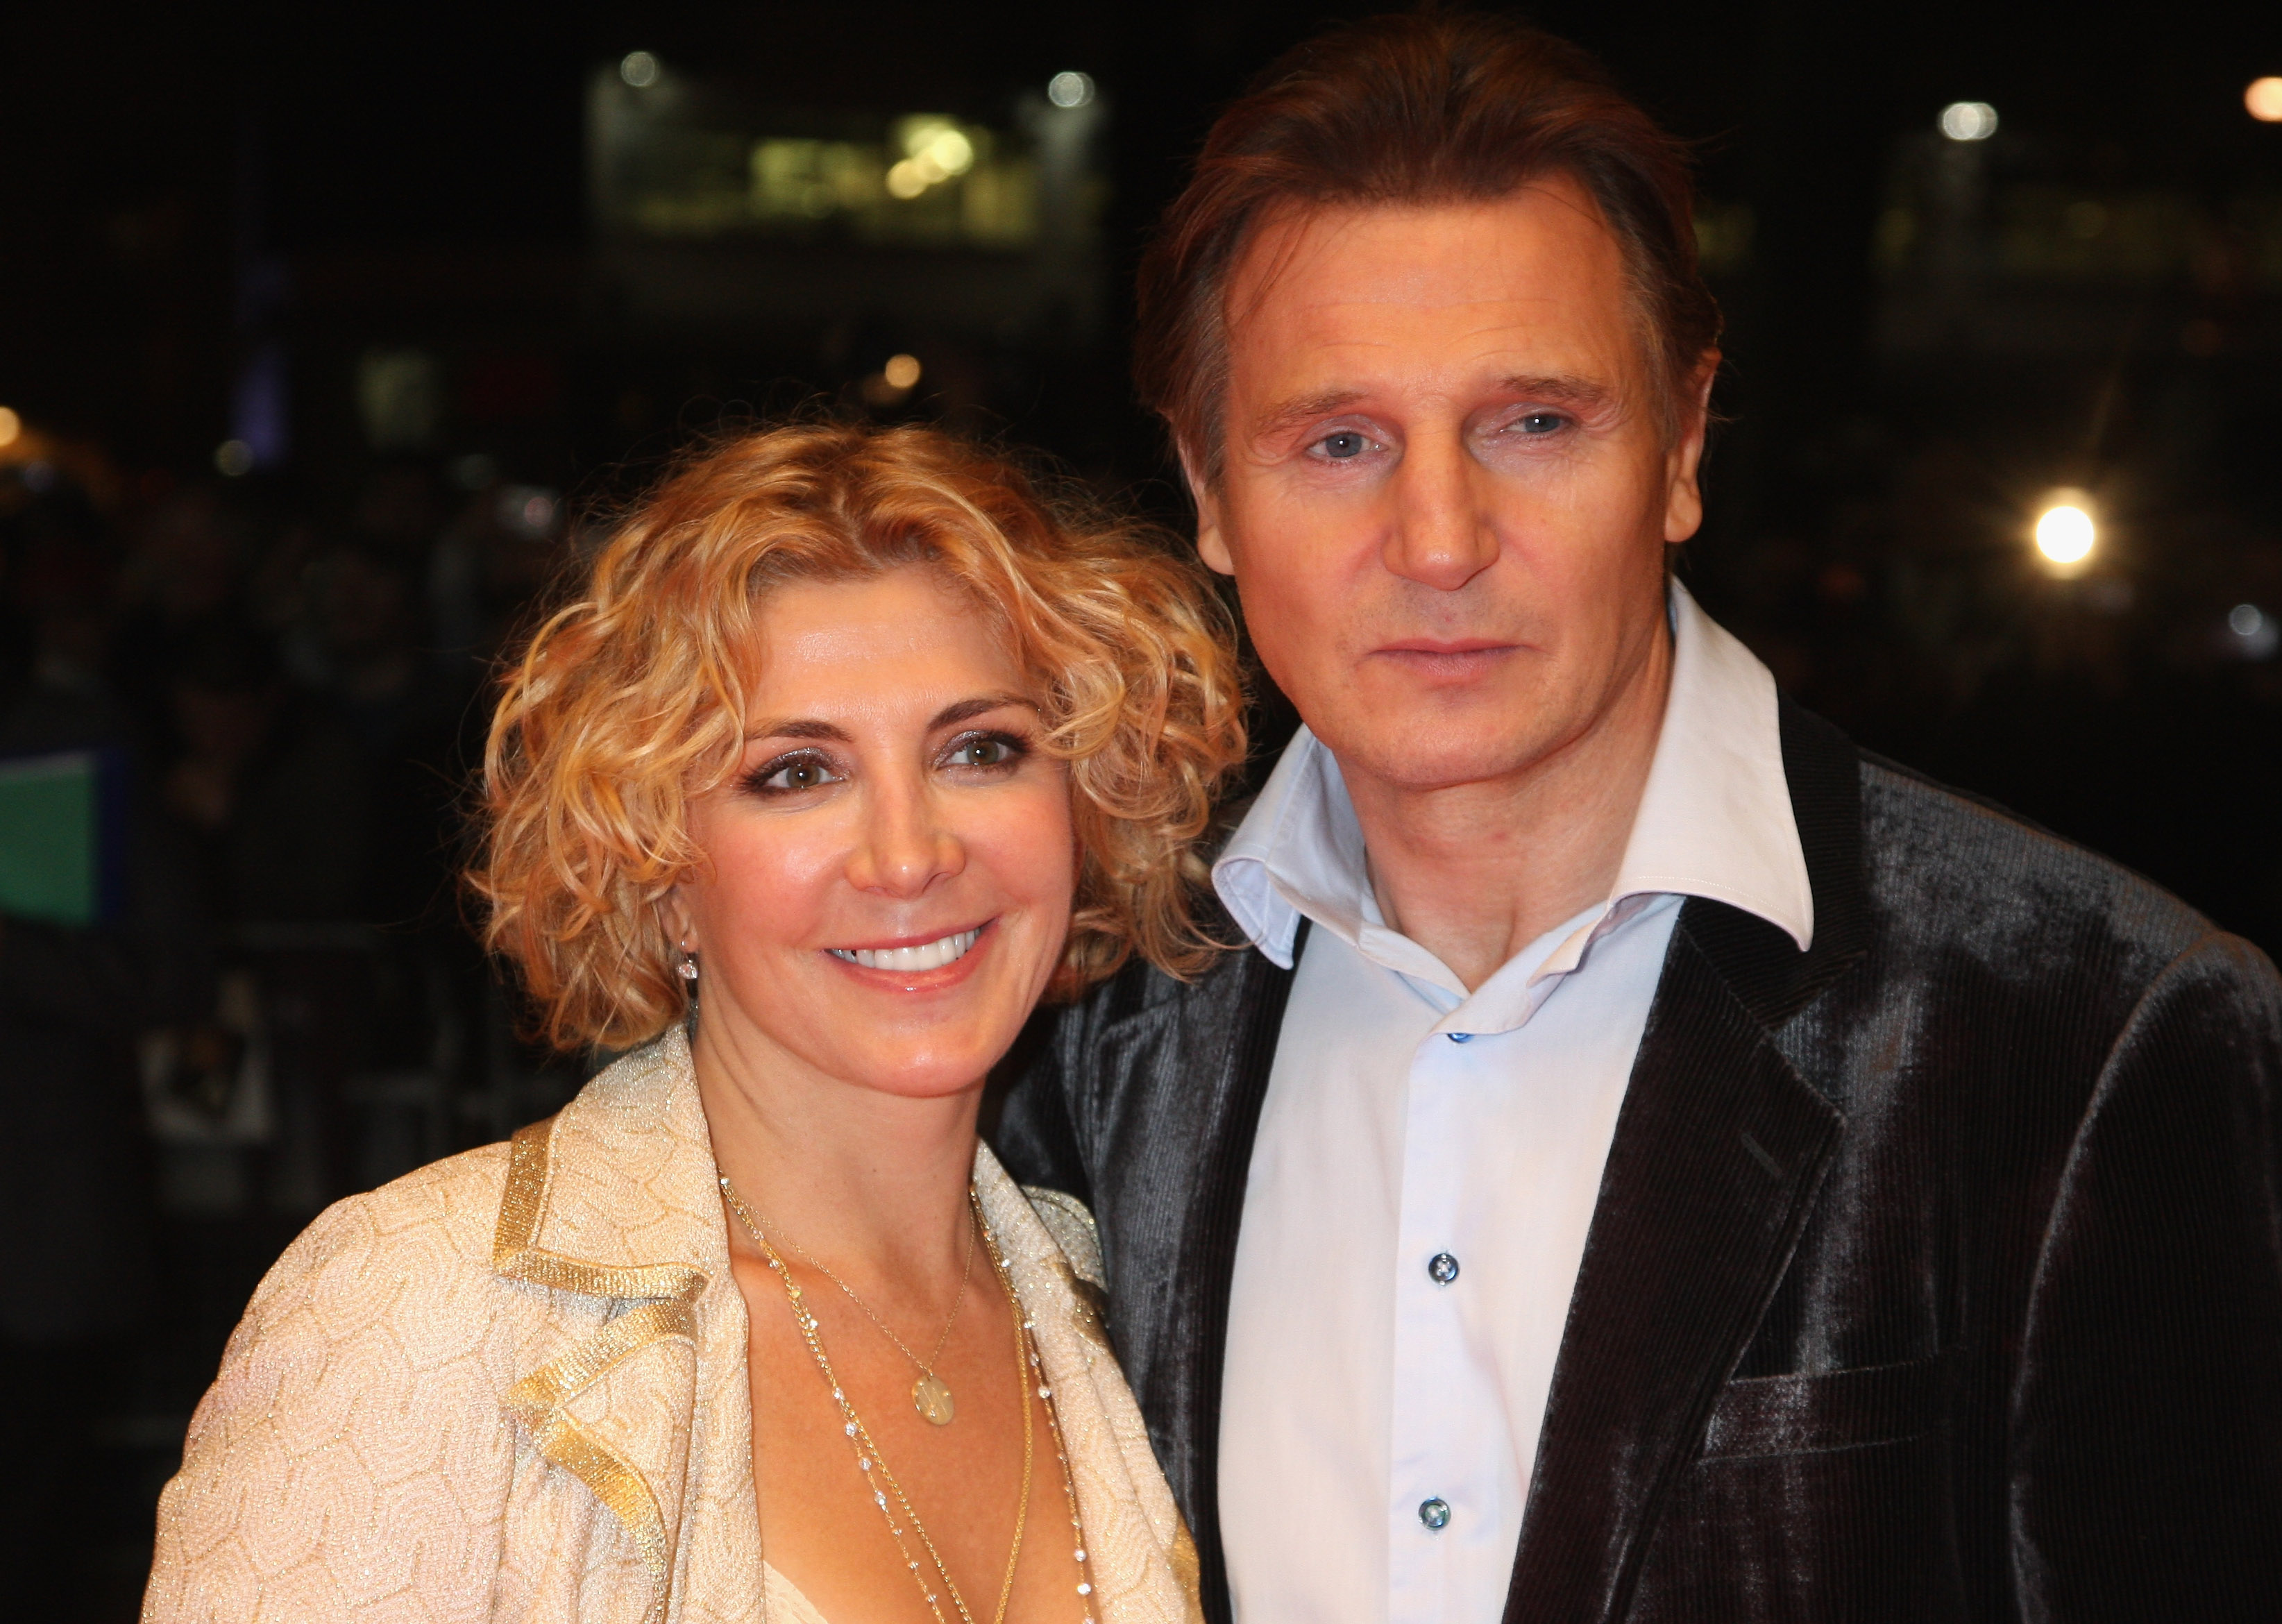 Liam Neeson and Natasha Richardson at the BFI 52 London Film Festival: "The Other Man" Premiere in London on Oct. 17, 2008.